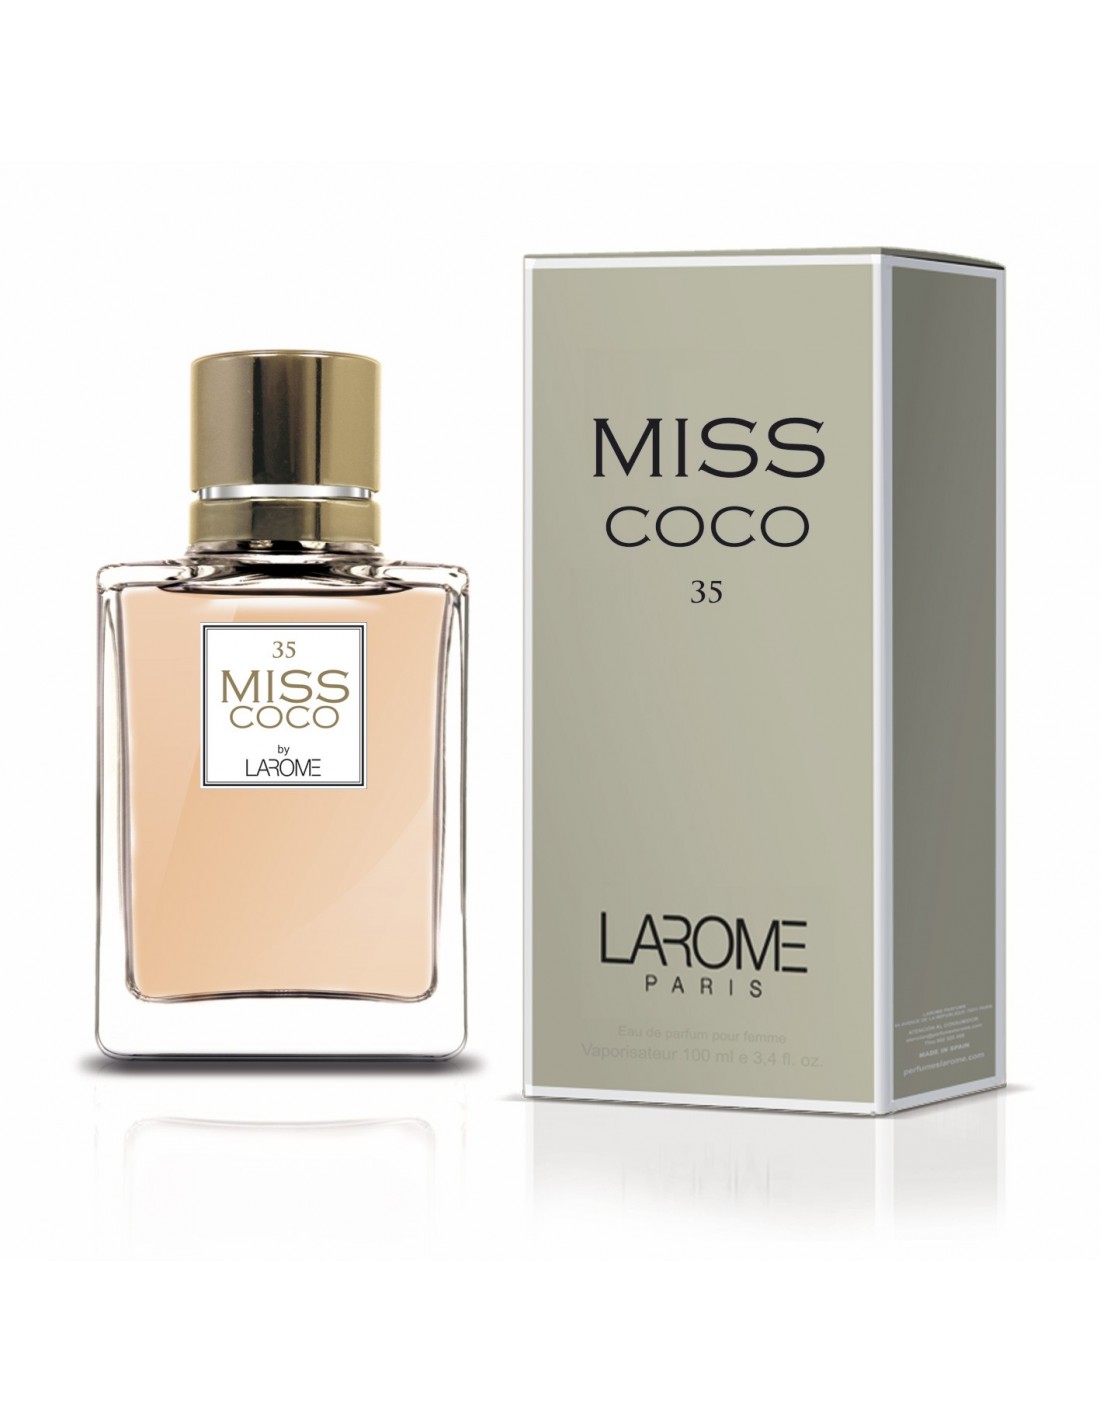 ▷ MISS COCO by LAROME ✶ Perfume for women Size 100ml